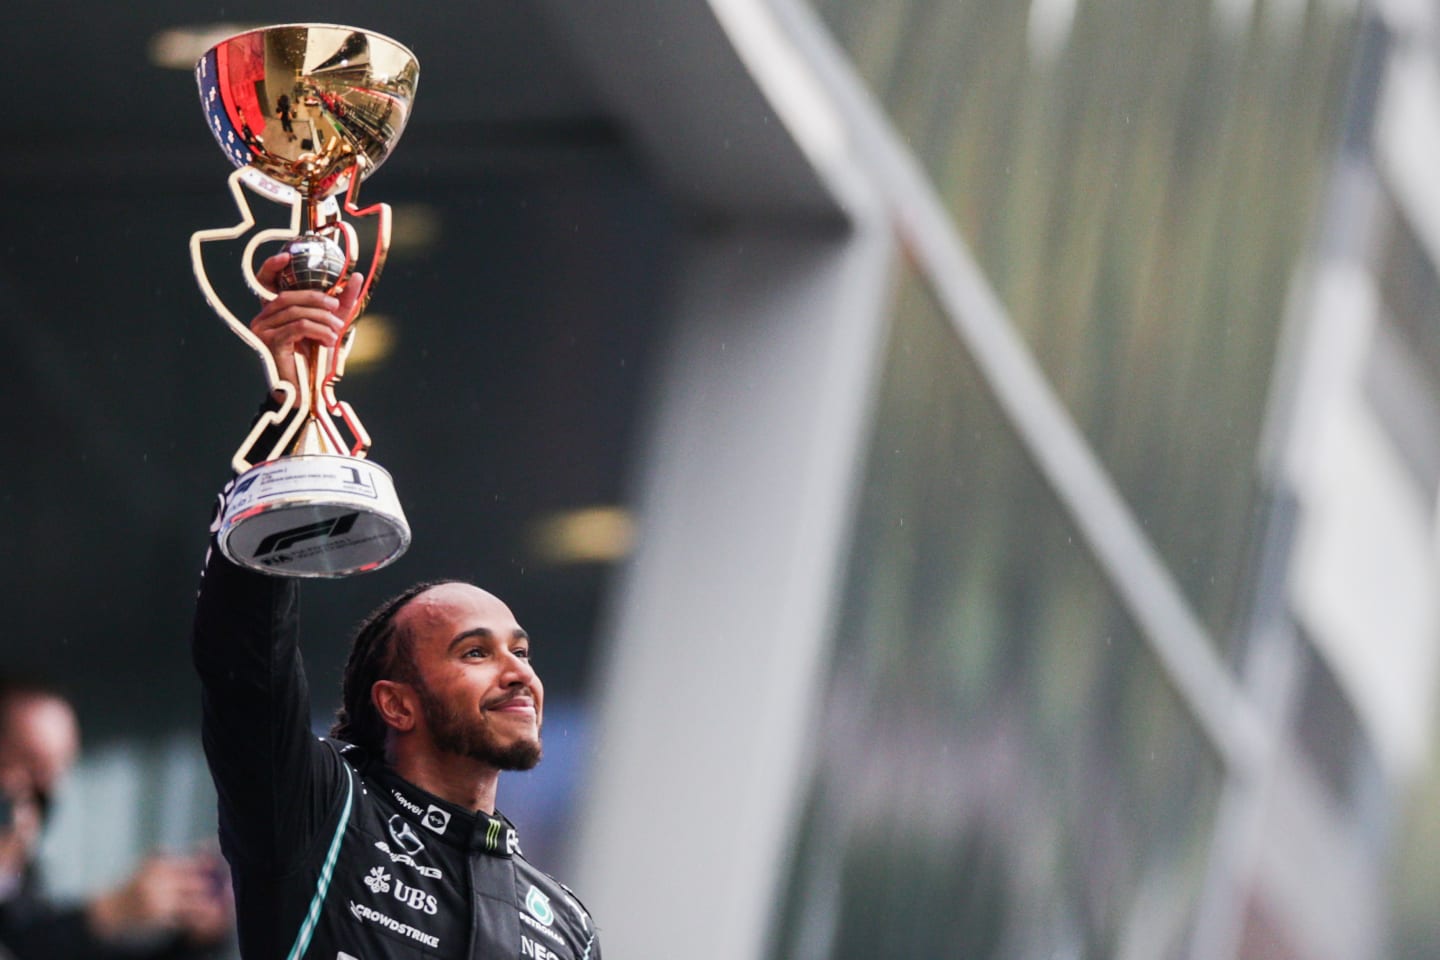 SOCHI, RUSSIA - SEPTEMBER 26: Lewis Hamilton of Mercedes and Great Britain celebrates winning his